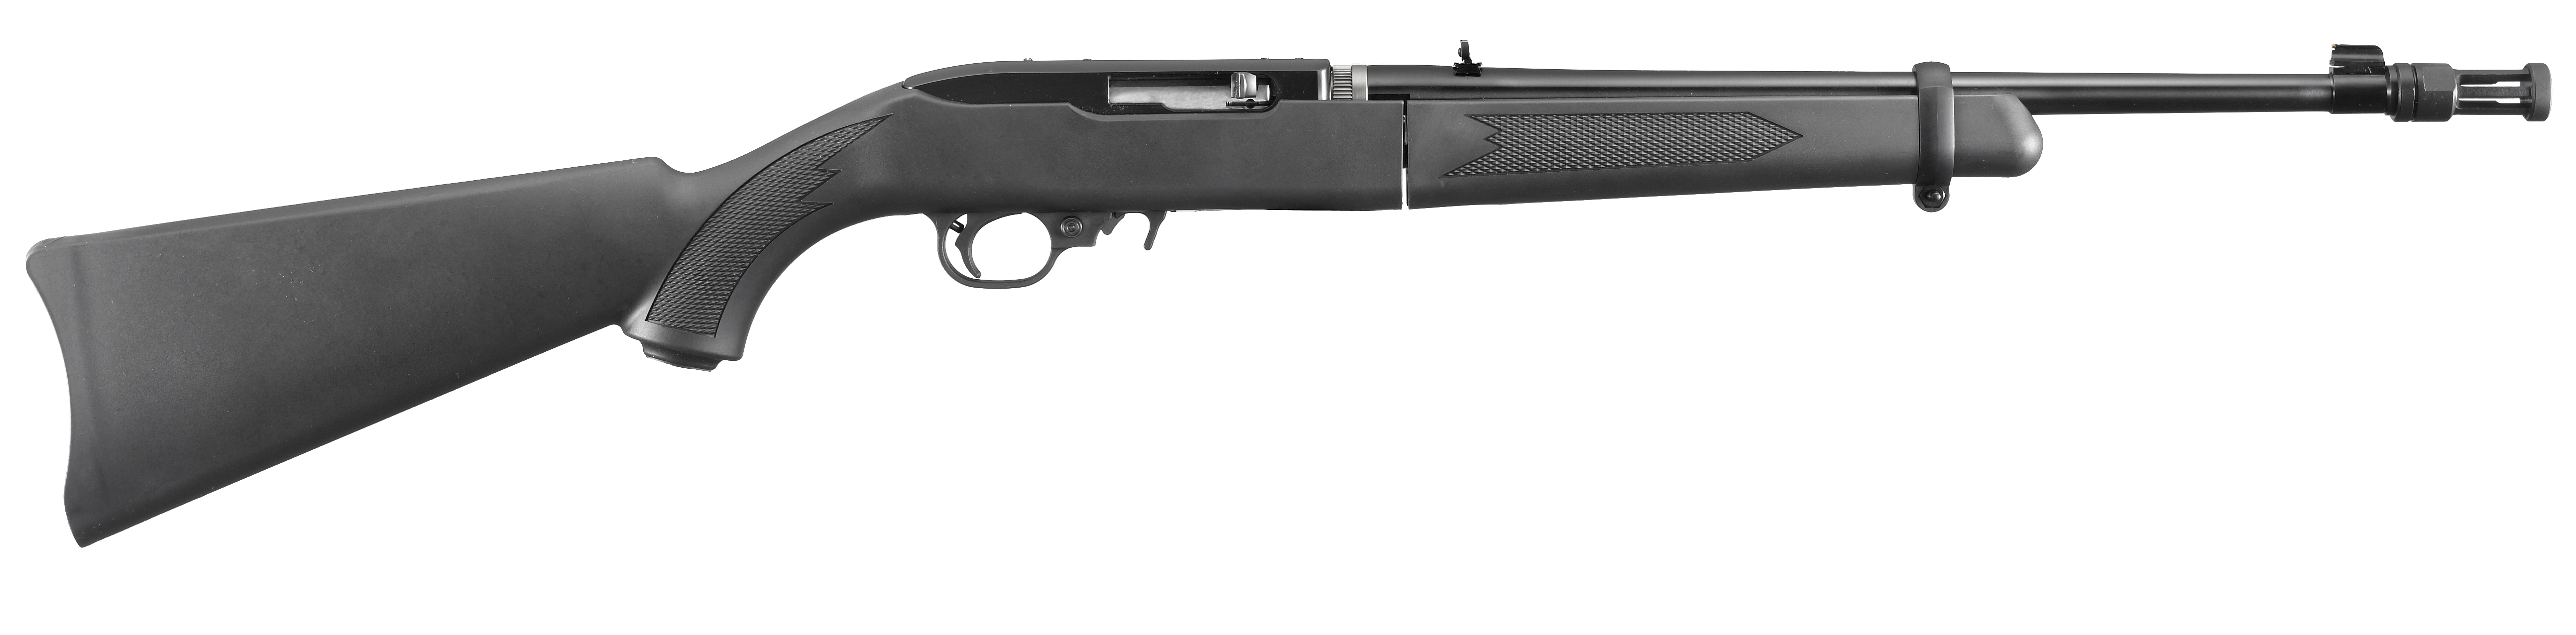 Weapons Ruger 10 22 Rifle 5174x1276